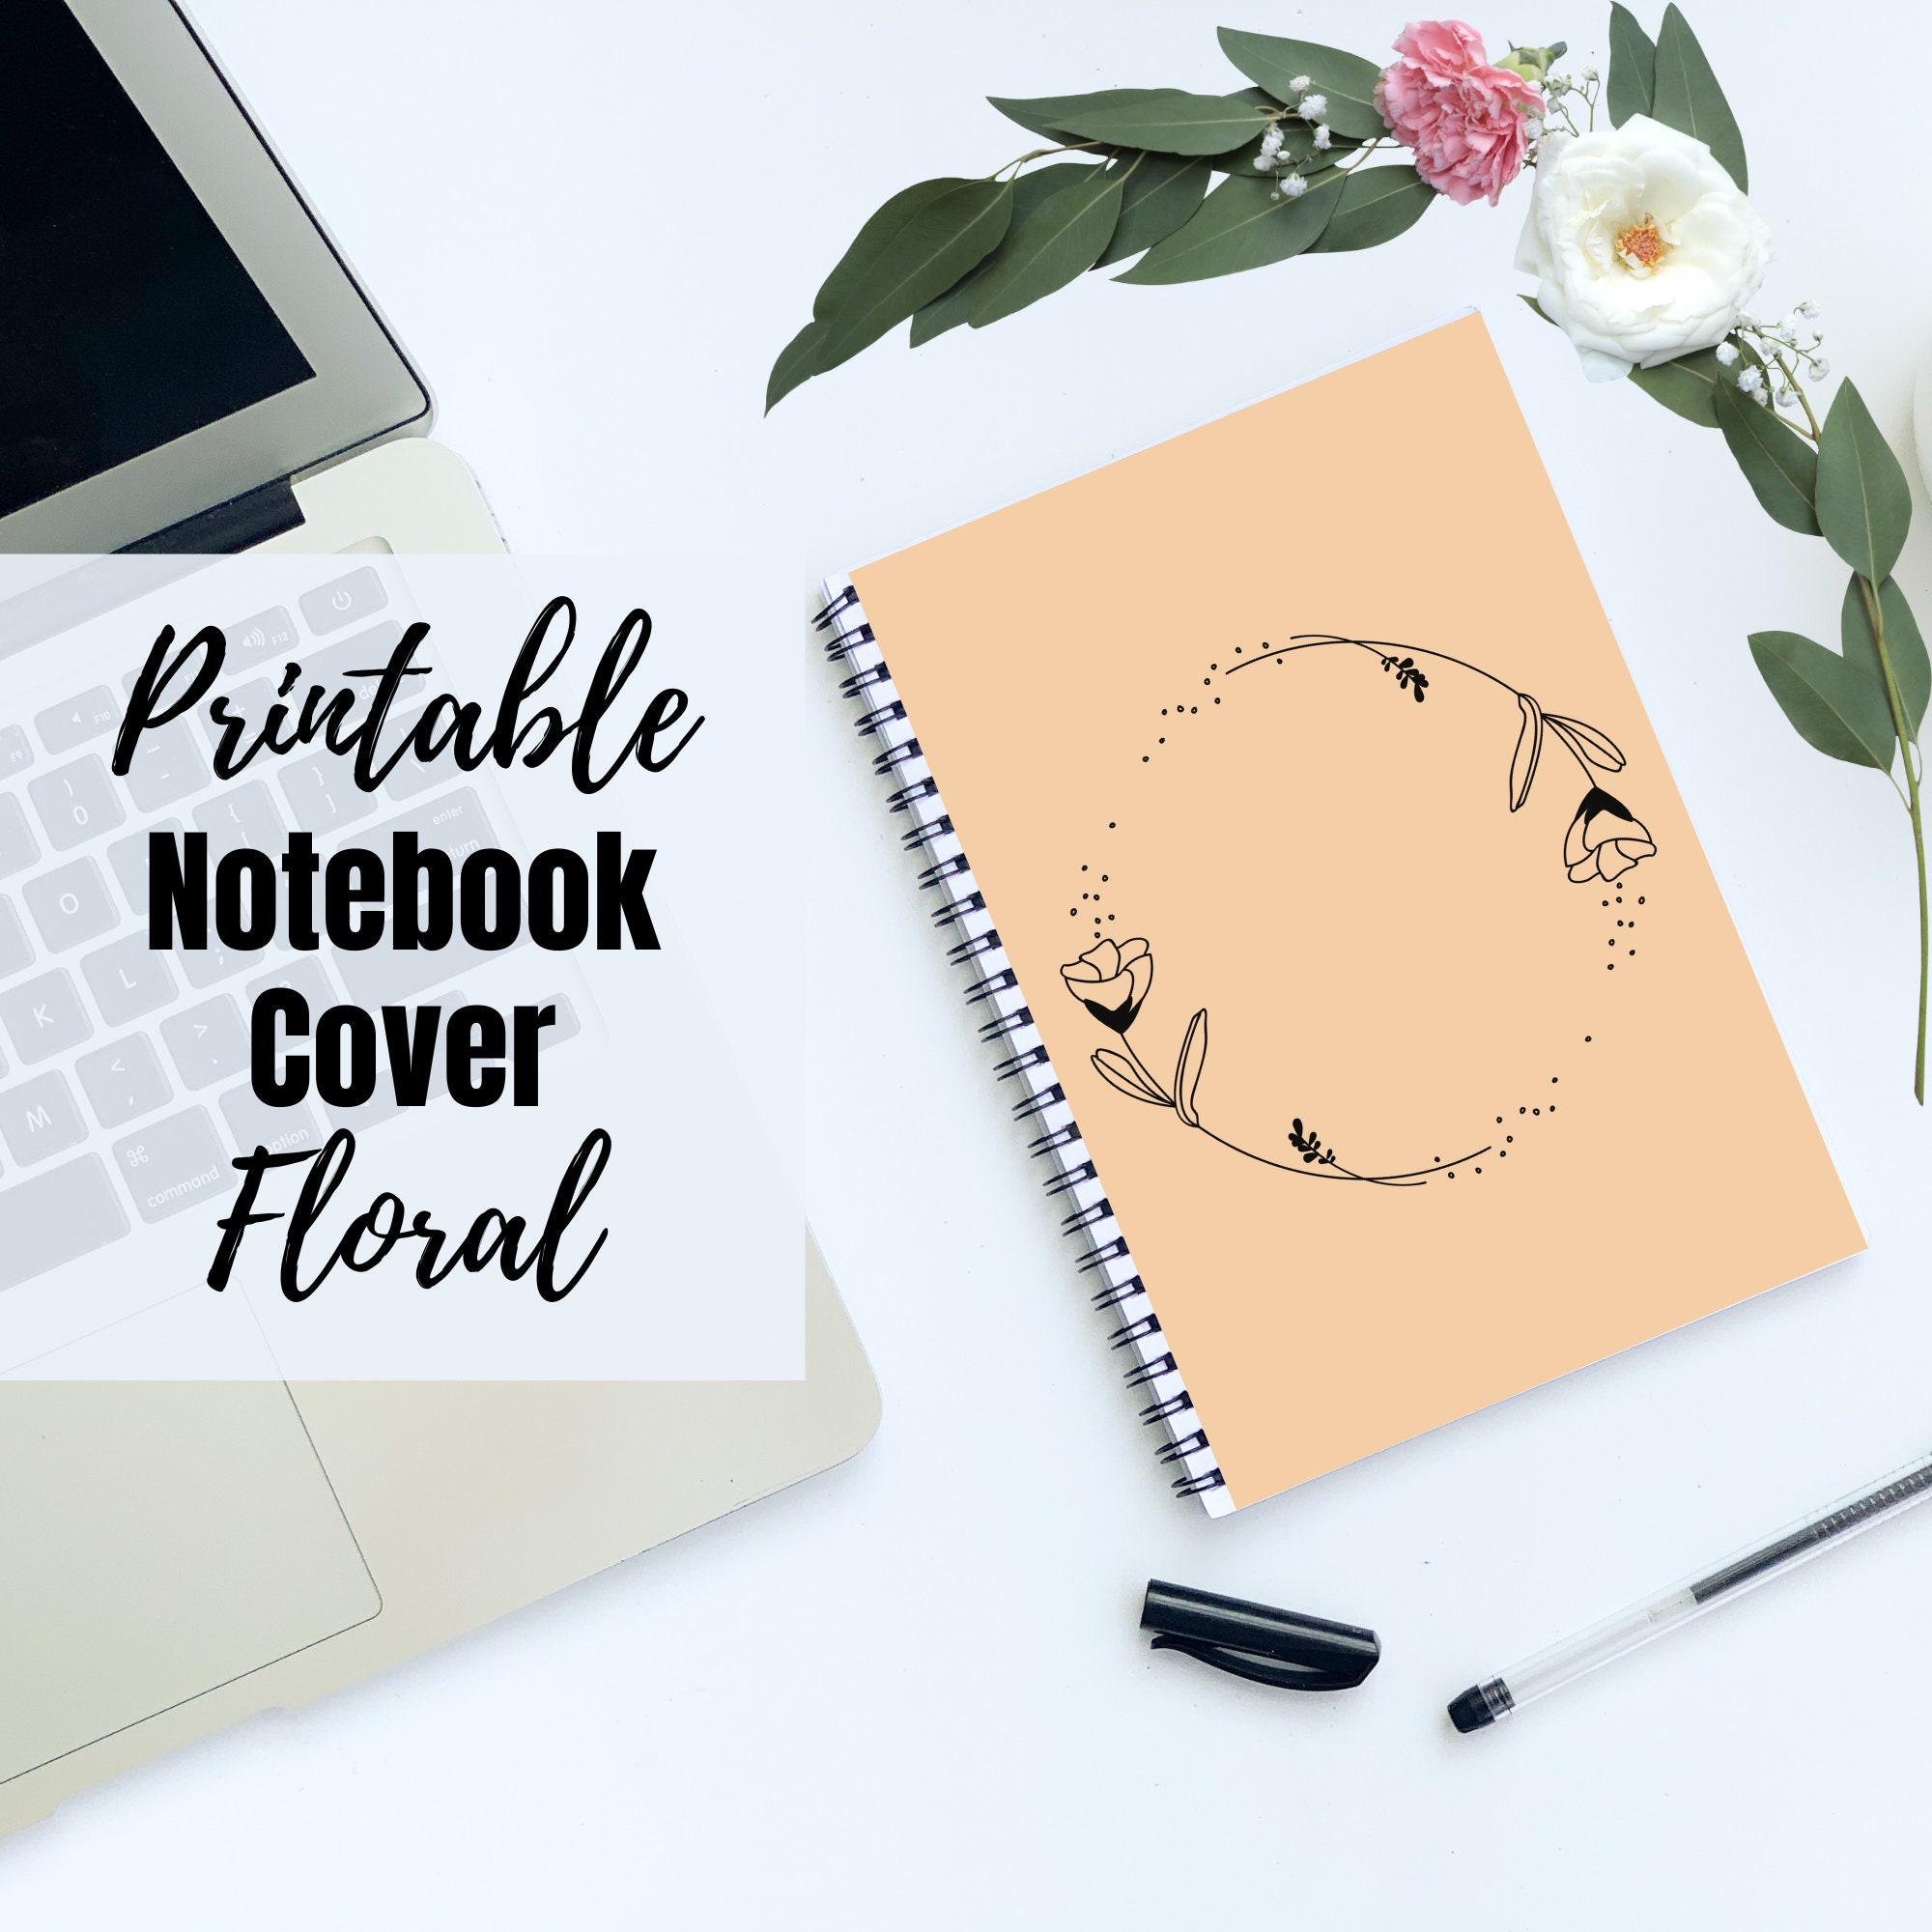 BEST VALUE 1 Printable Notebook Cover Brown Flower Theme - Instant Download  Pastel Colors, Lined Page, School Supplies, Office, And More